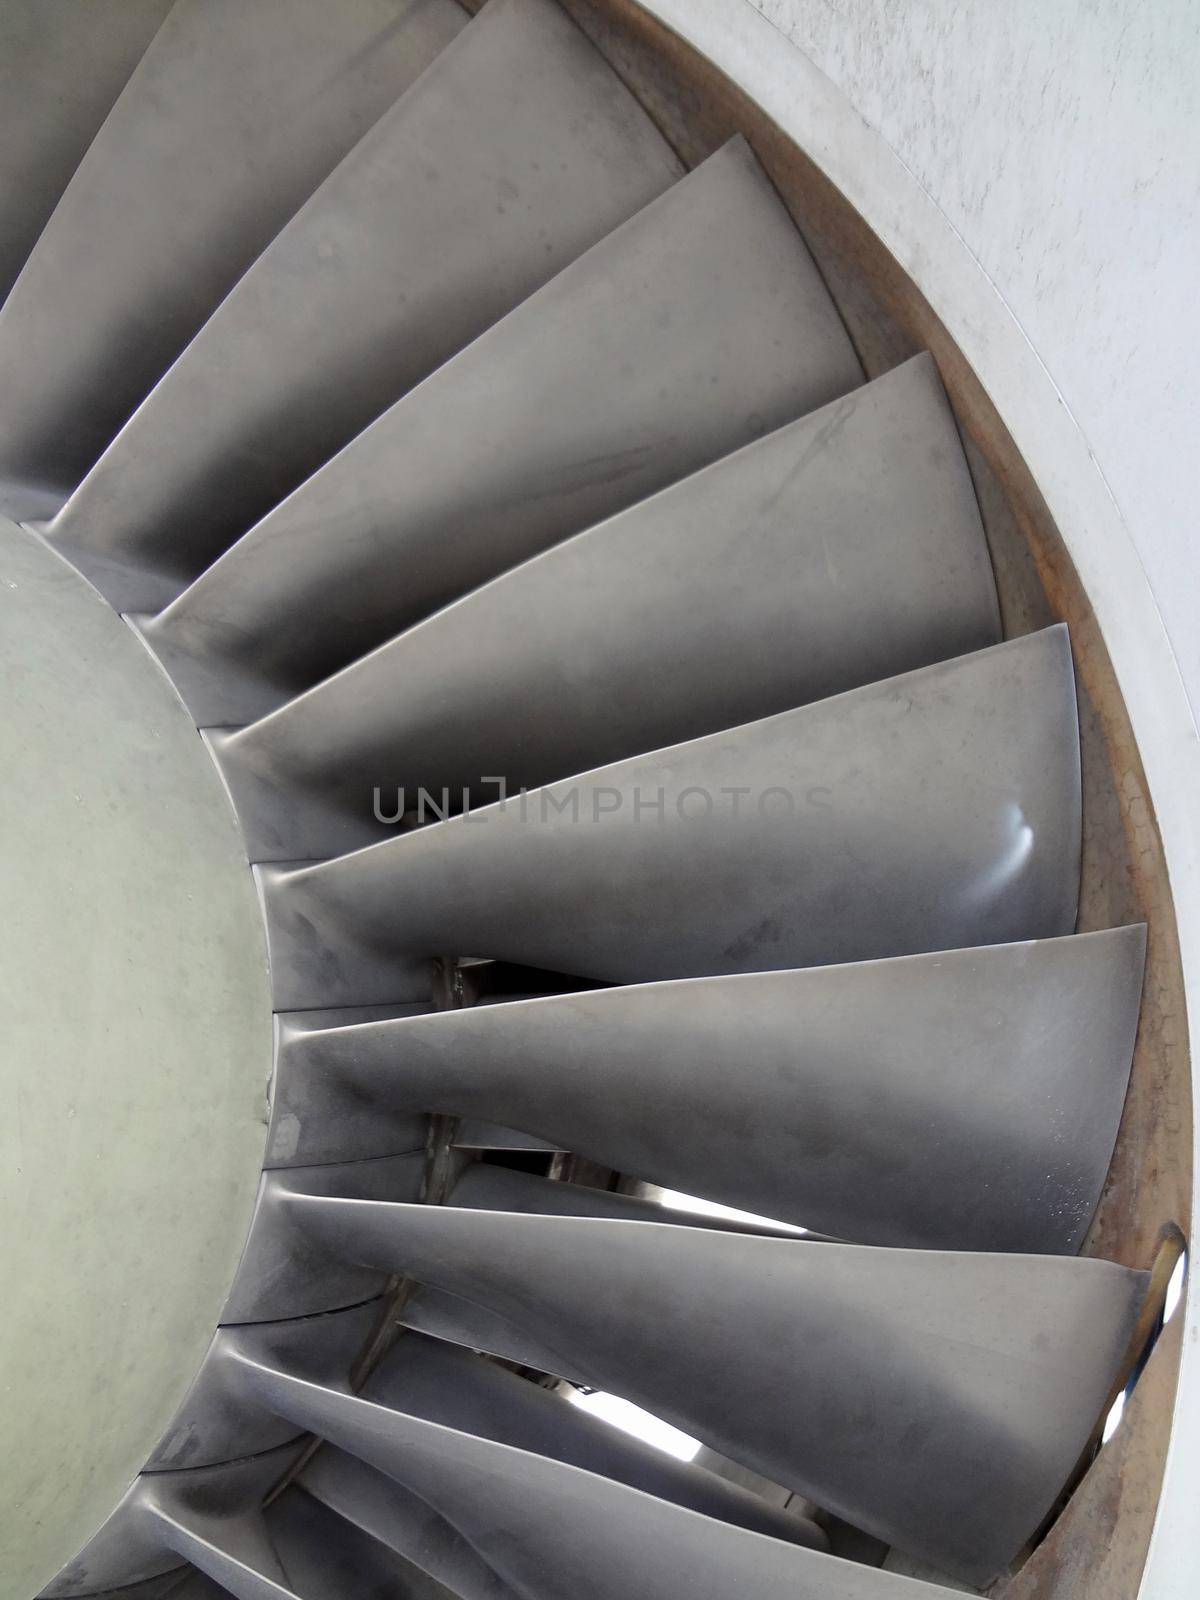 Close up of turbine and fan blades of a fighter jet engine by EricGBVD